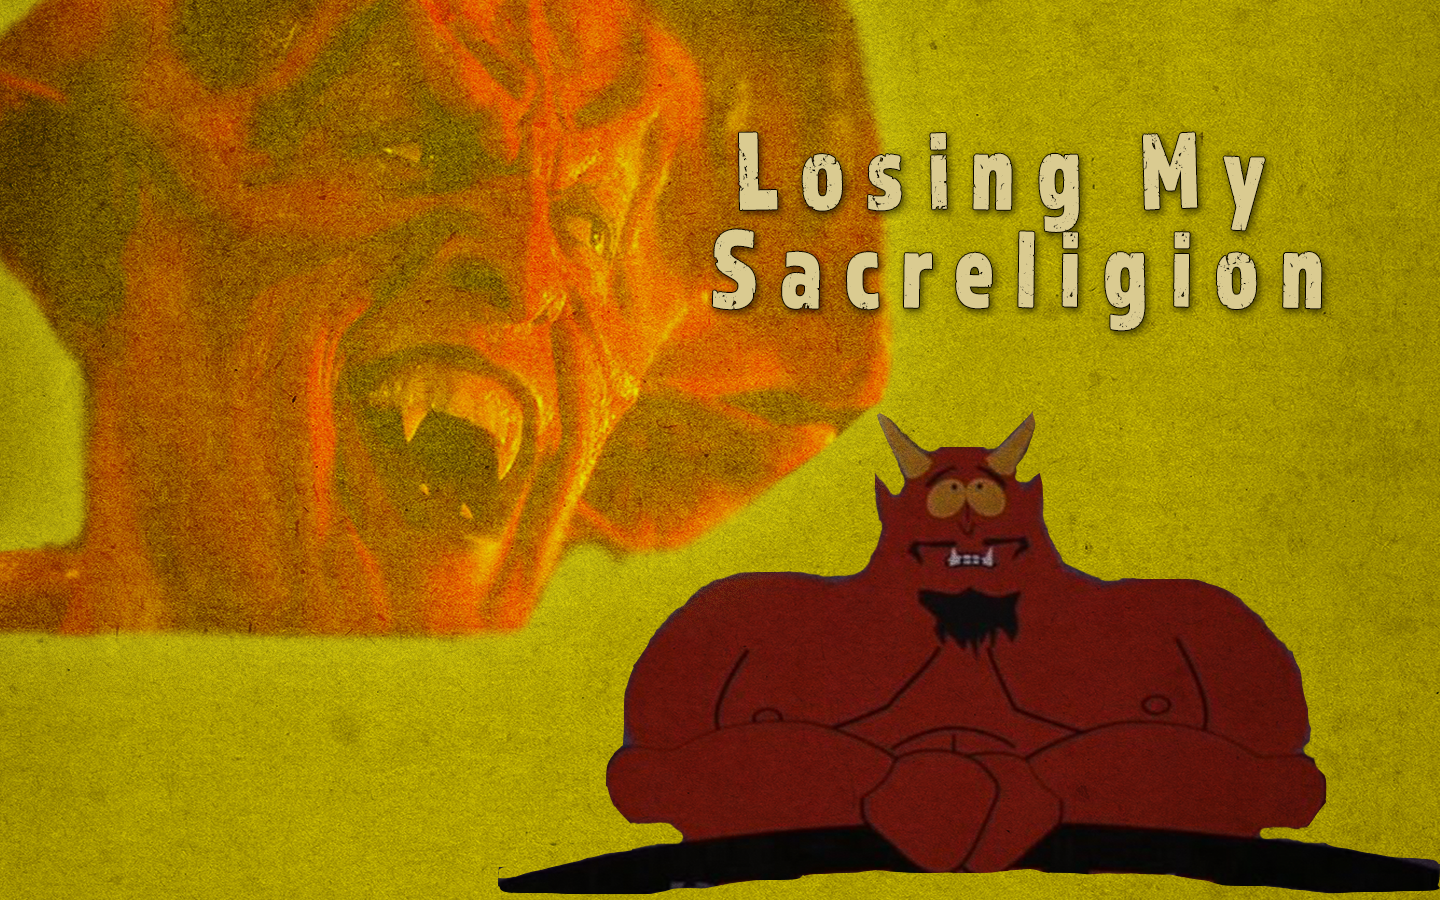 Losing My Sacrilegion: Overview